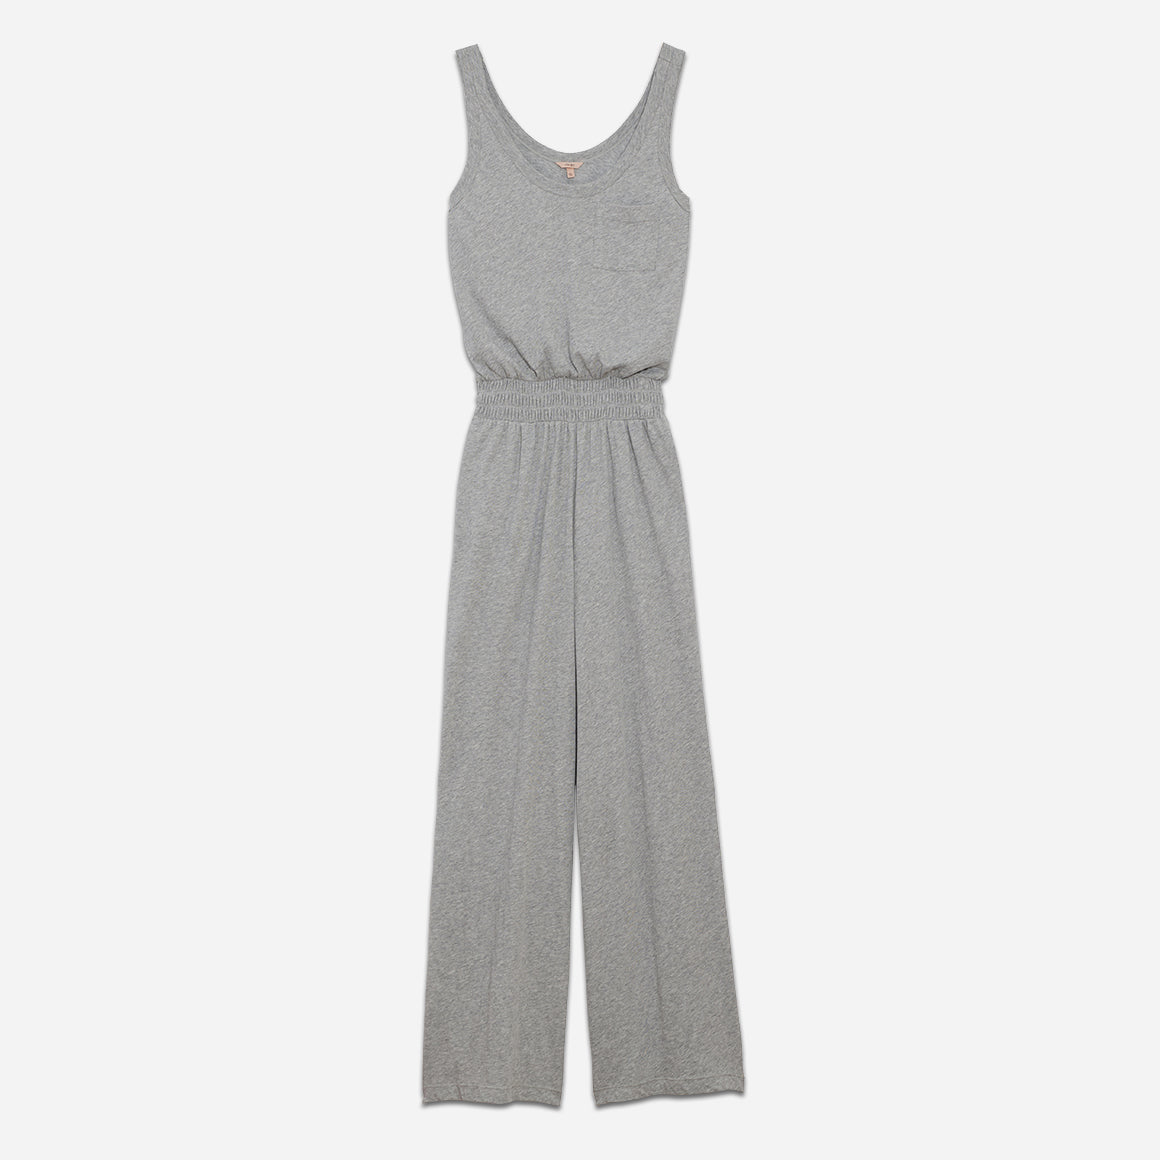 Eberjey's Aloe Infused Cotton Wide Leg Jumpsuit in a heathered grey colorway photographed against a light grey background.